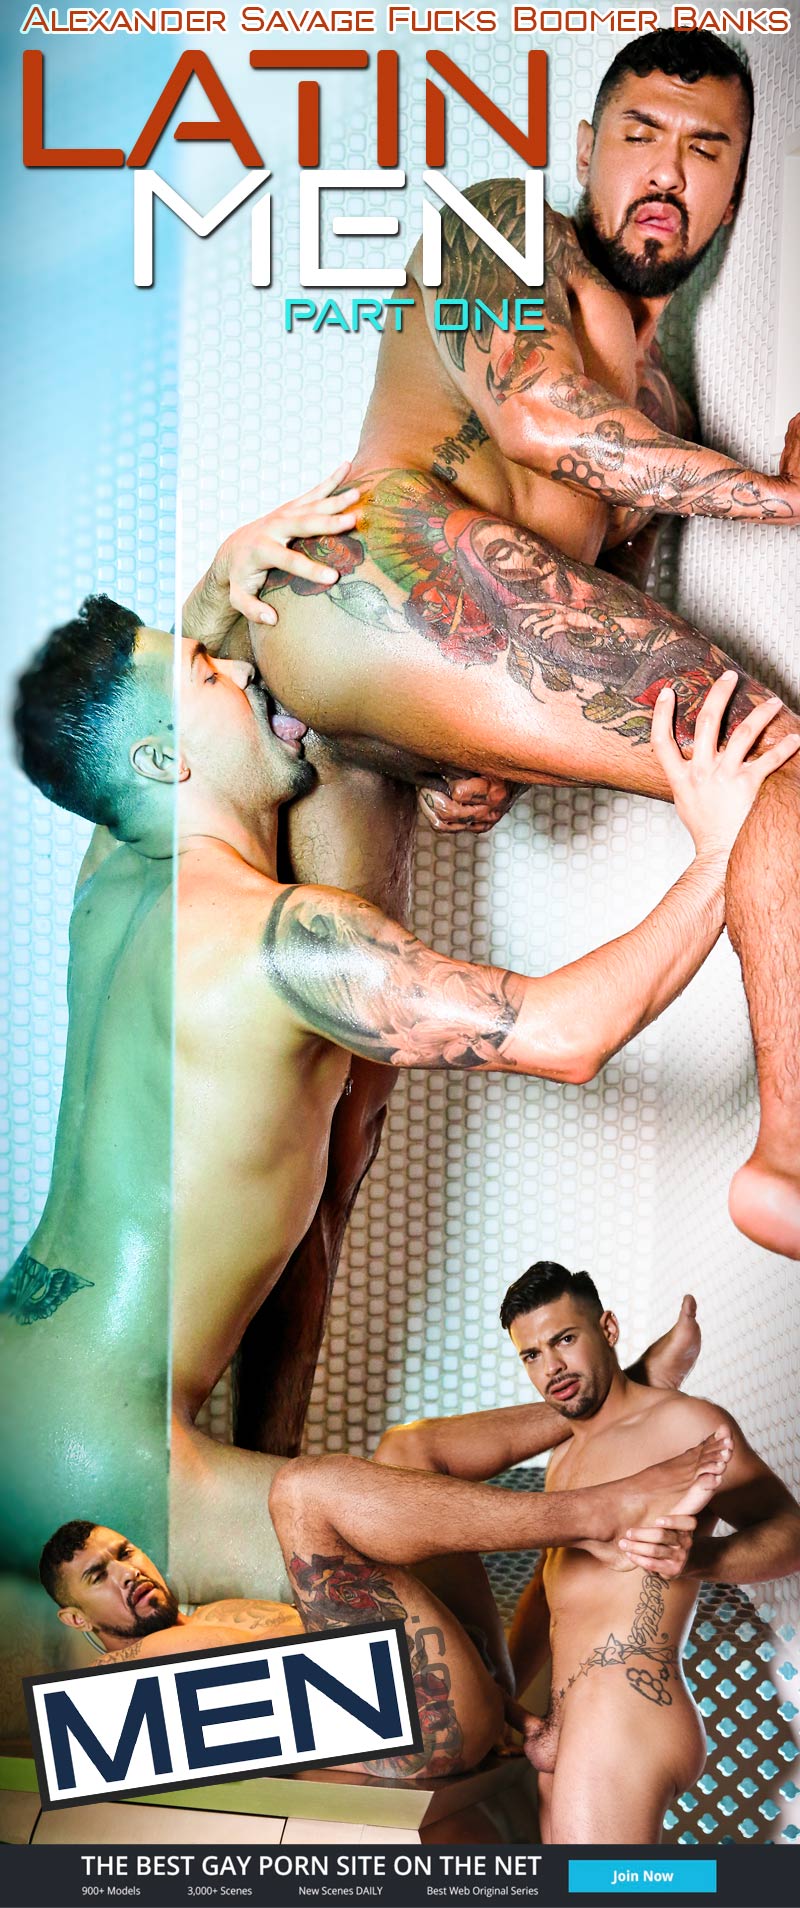 Explore The Sensual Side of Boomer Banks in Nude Gallery